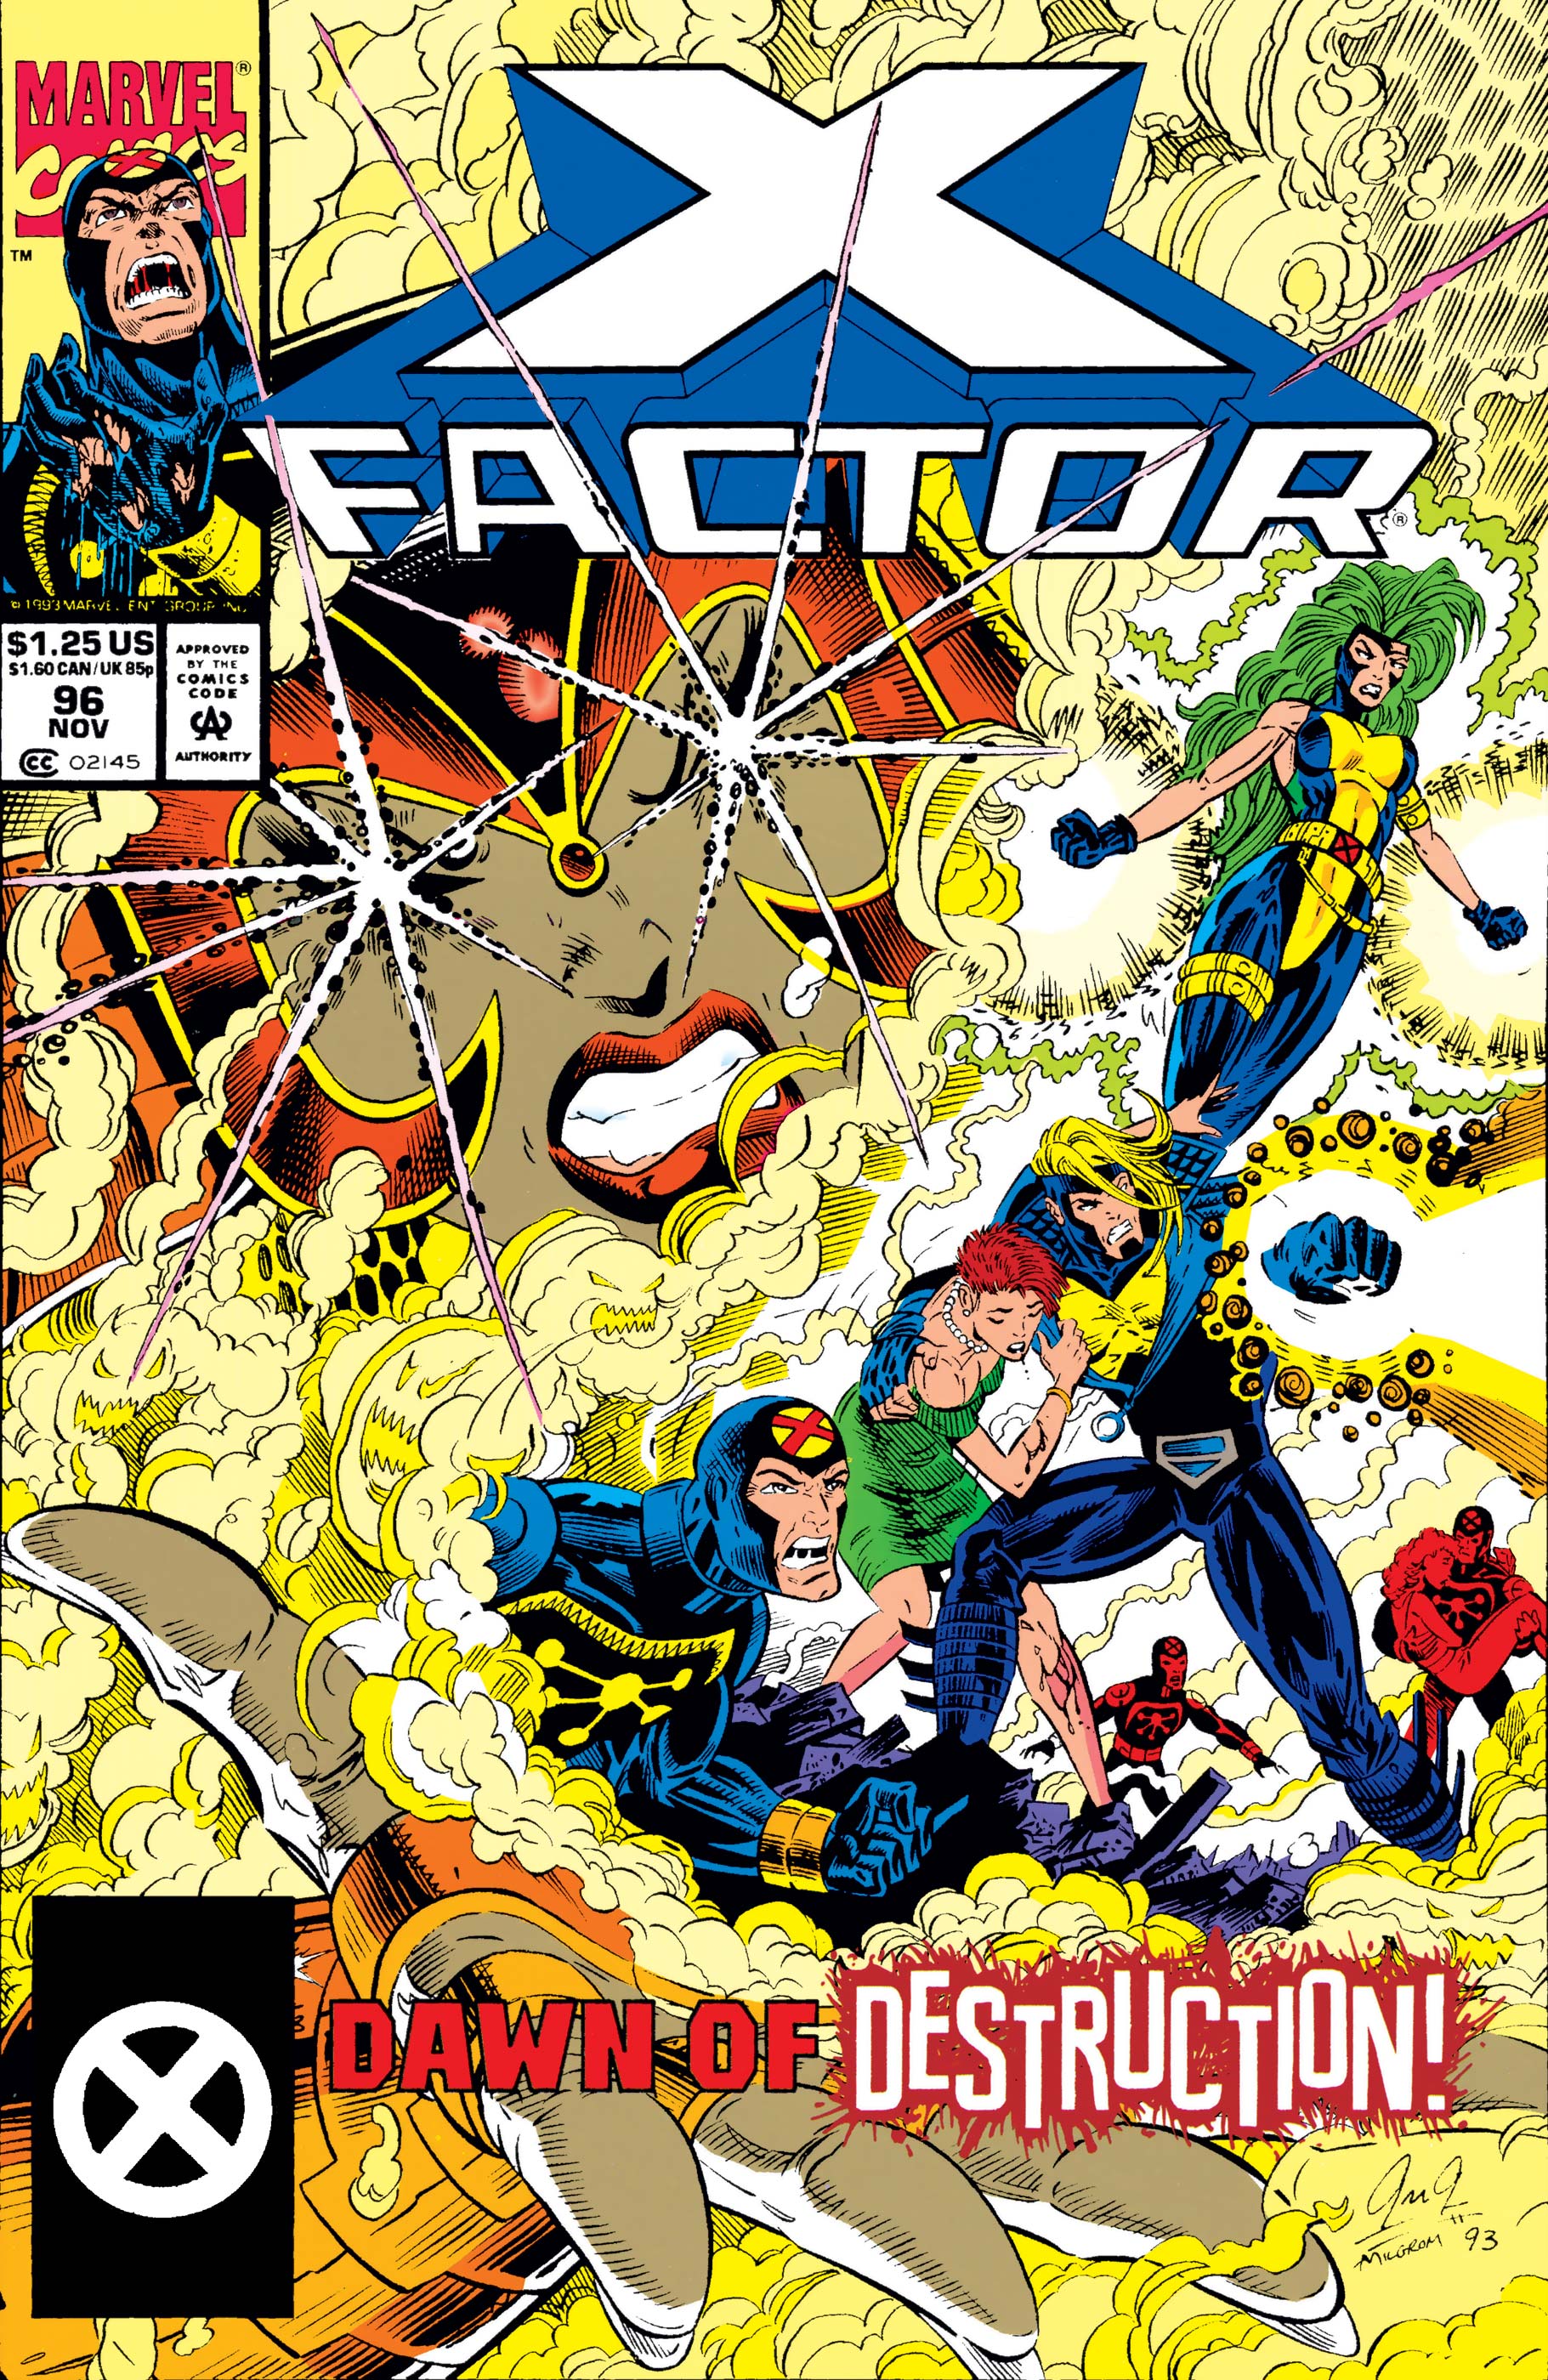 1986 Series 9.2 X-Factor #78 May 1992 Marvel NM 